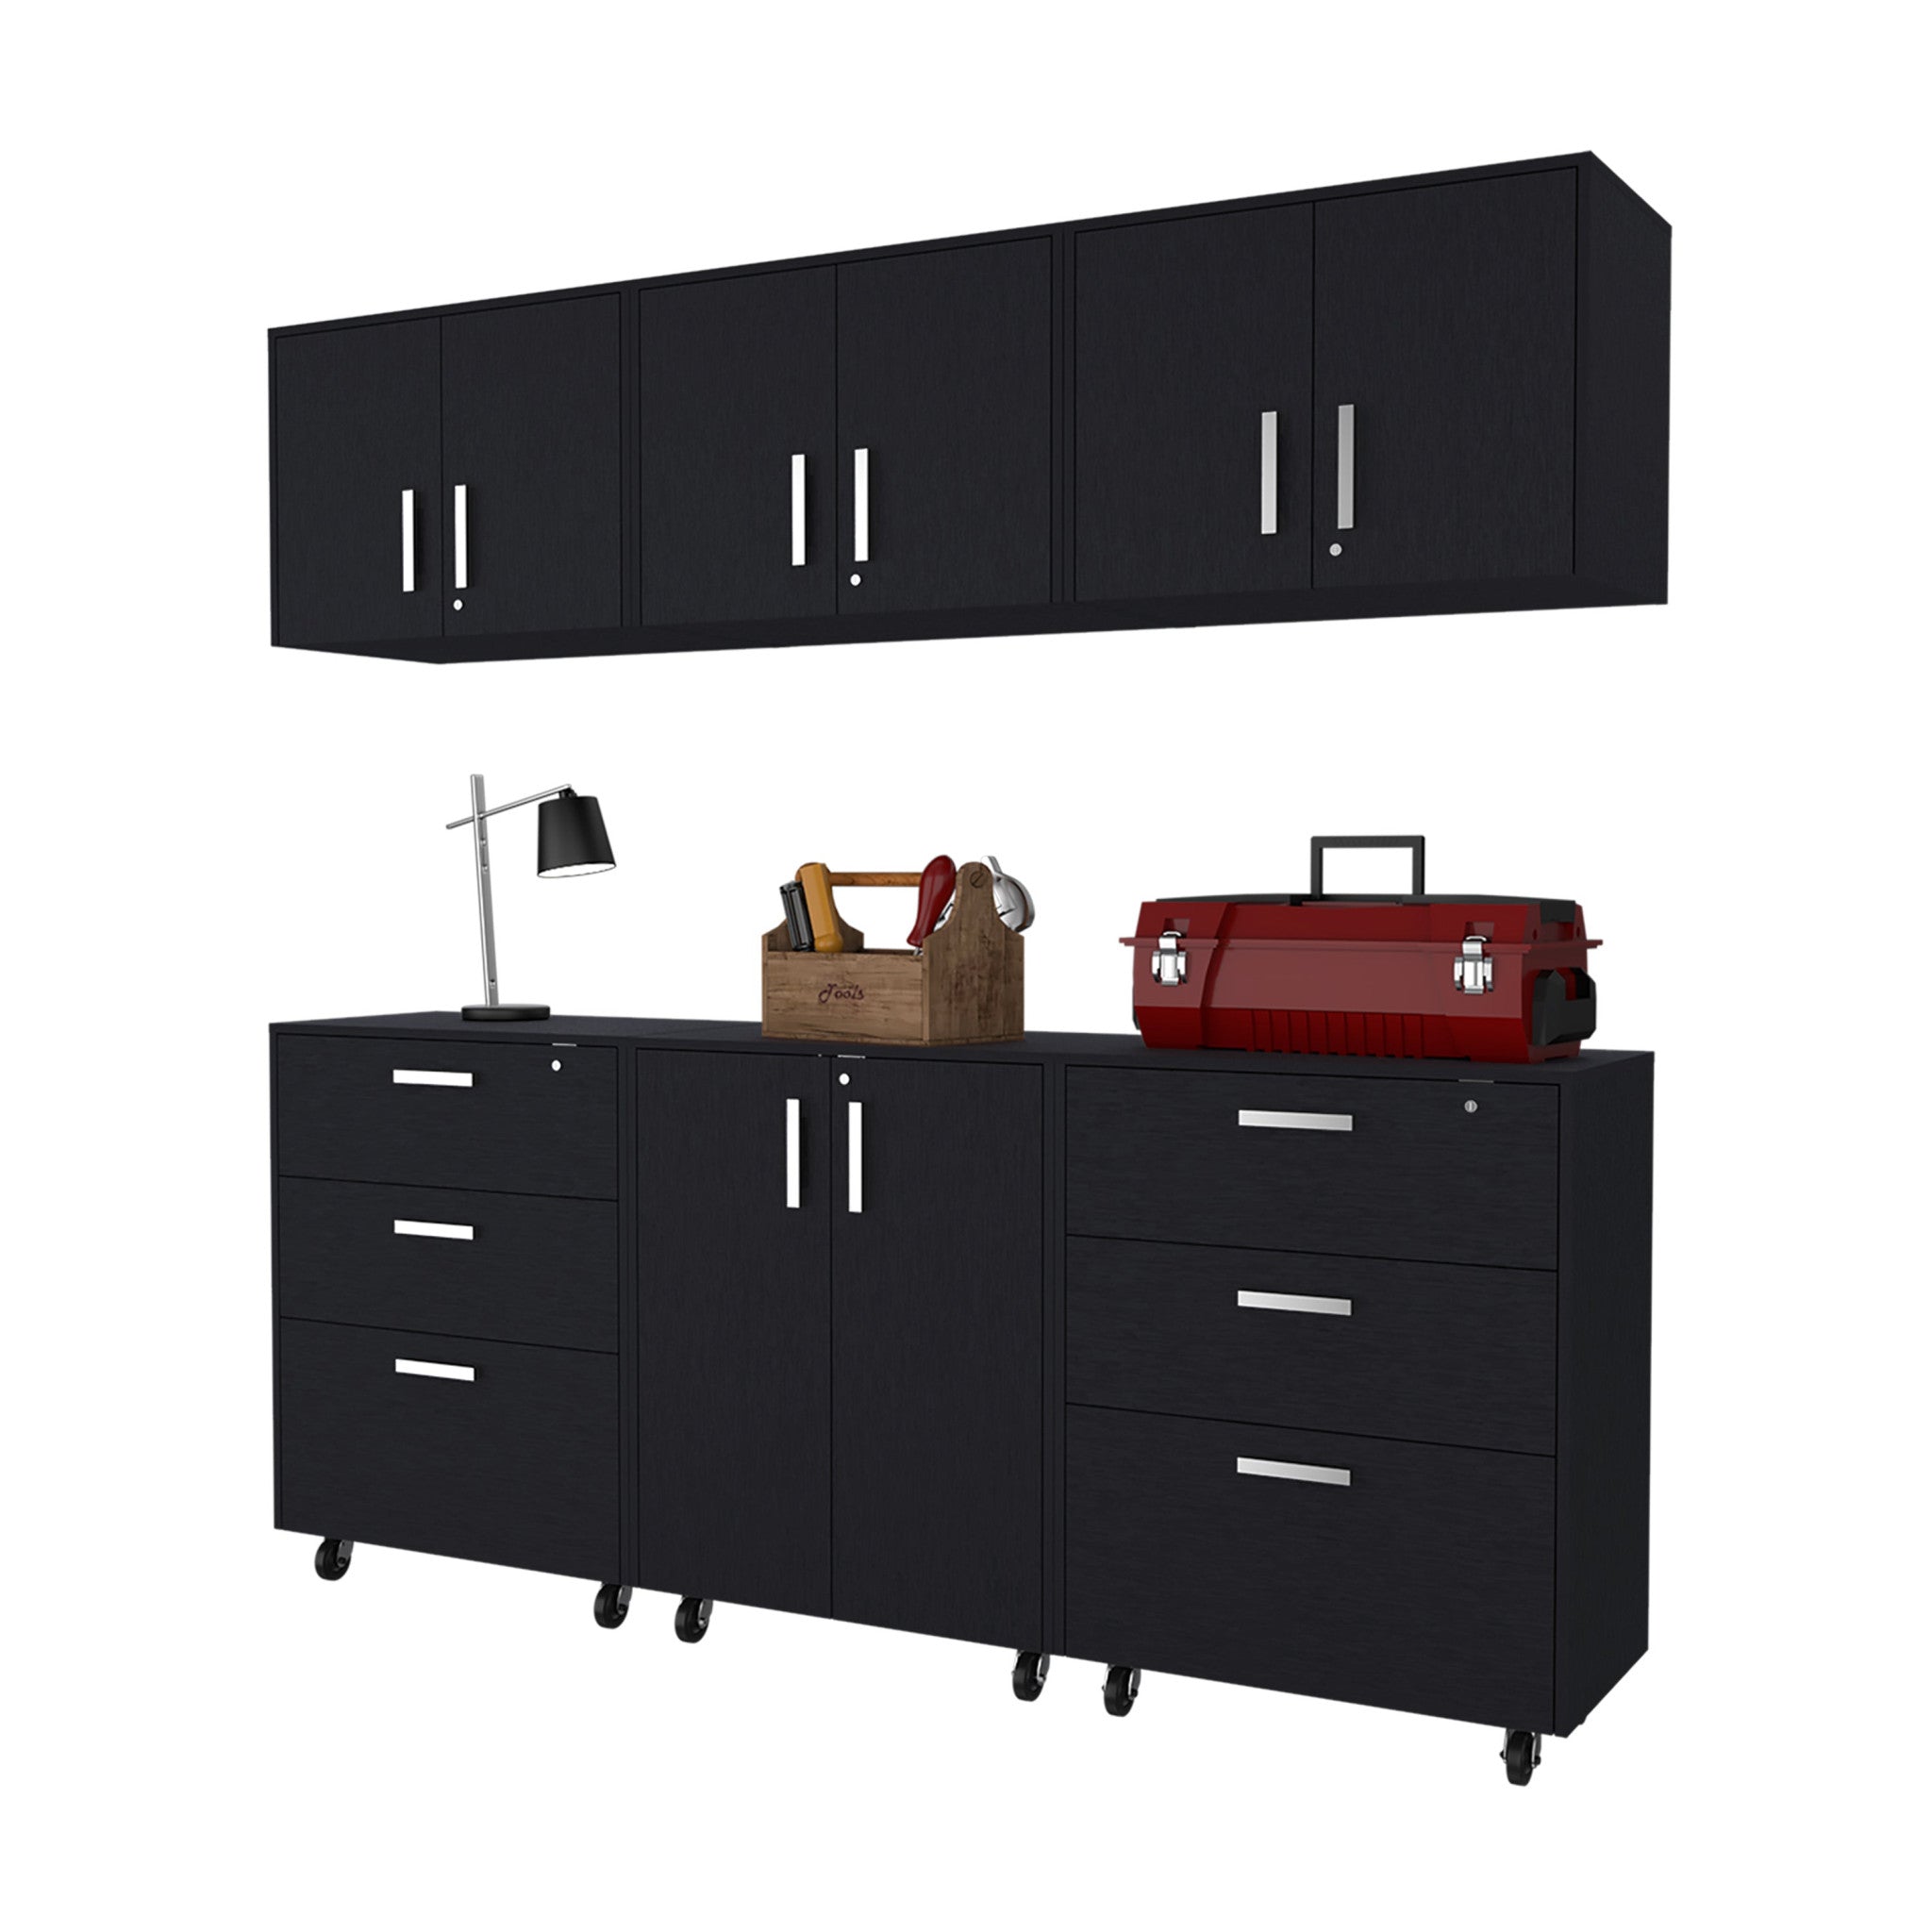 28" Black Wall mounted Accent Cabinet With Eight Shelves And Six Drawers